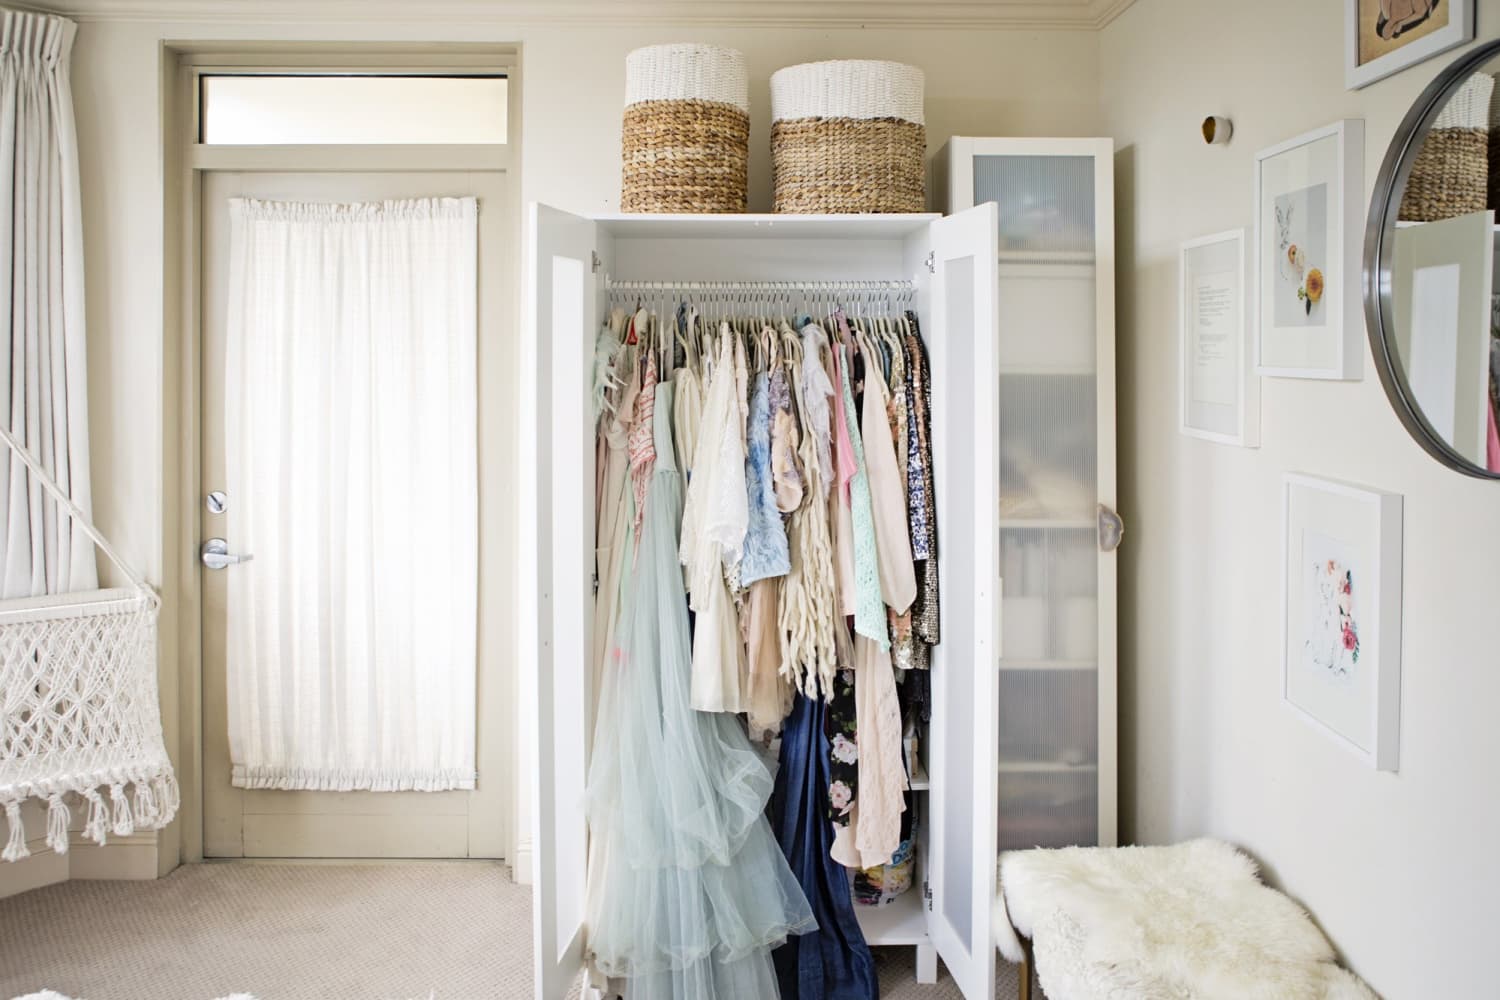 10 Ideas to Maximize Closet Space in A Small Apartment - That Actually Look  Good